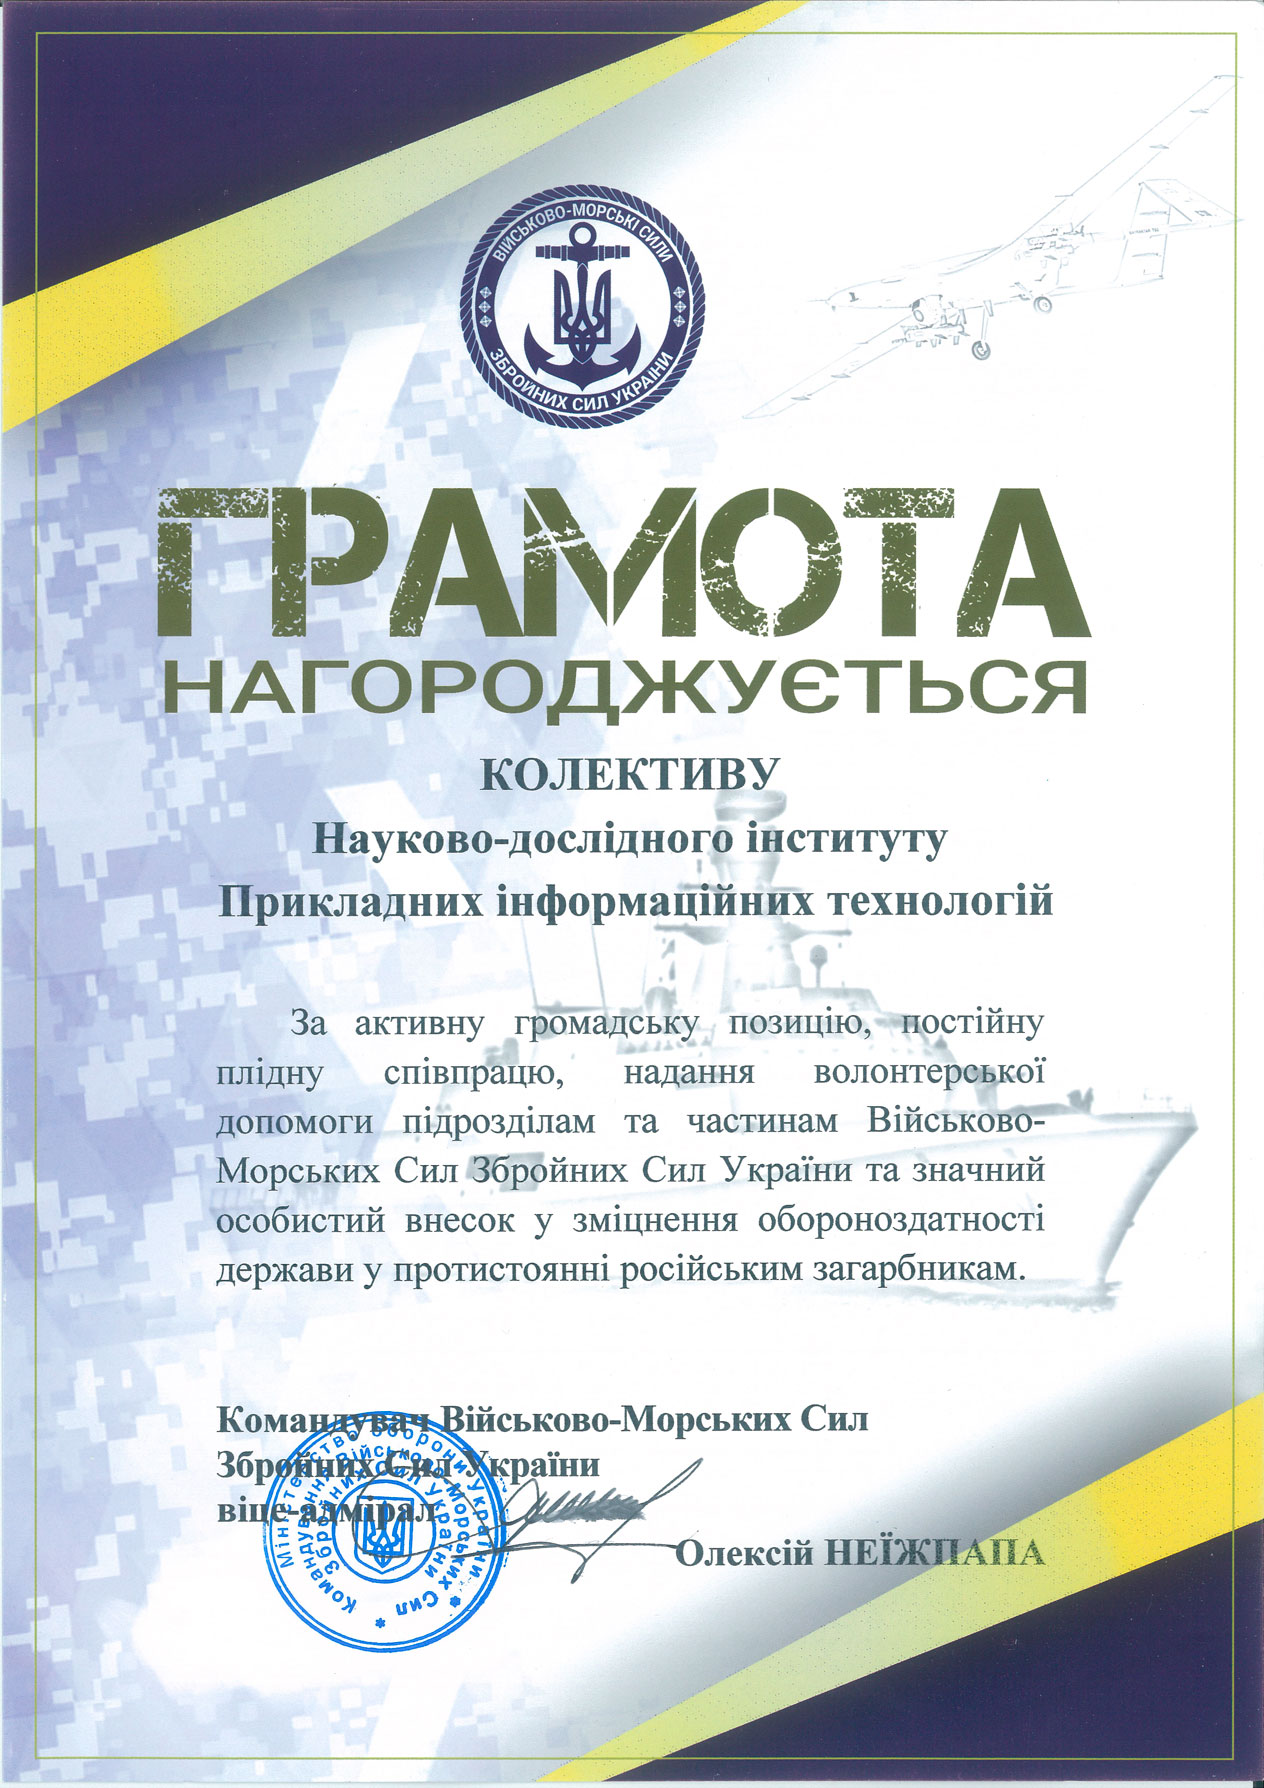 Certificate of the staff of the Research Institute of Applied Information Technologies